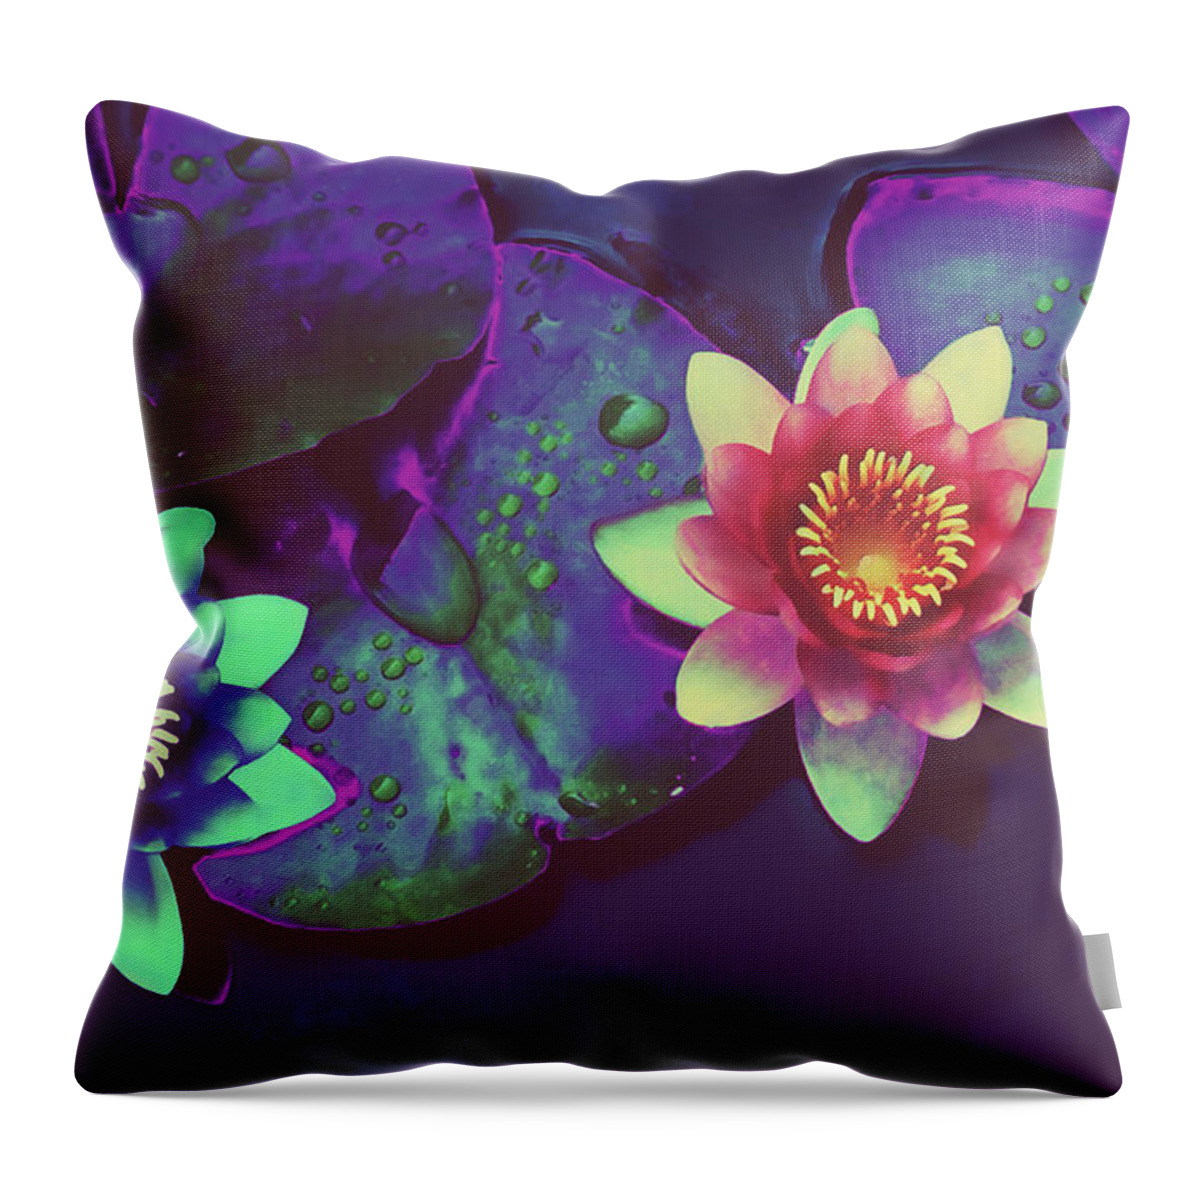 Acrylic Throw Pillow featuring the digital art Lotus by Mal-Z